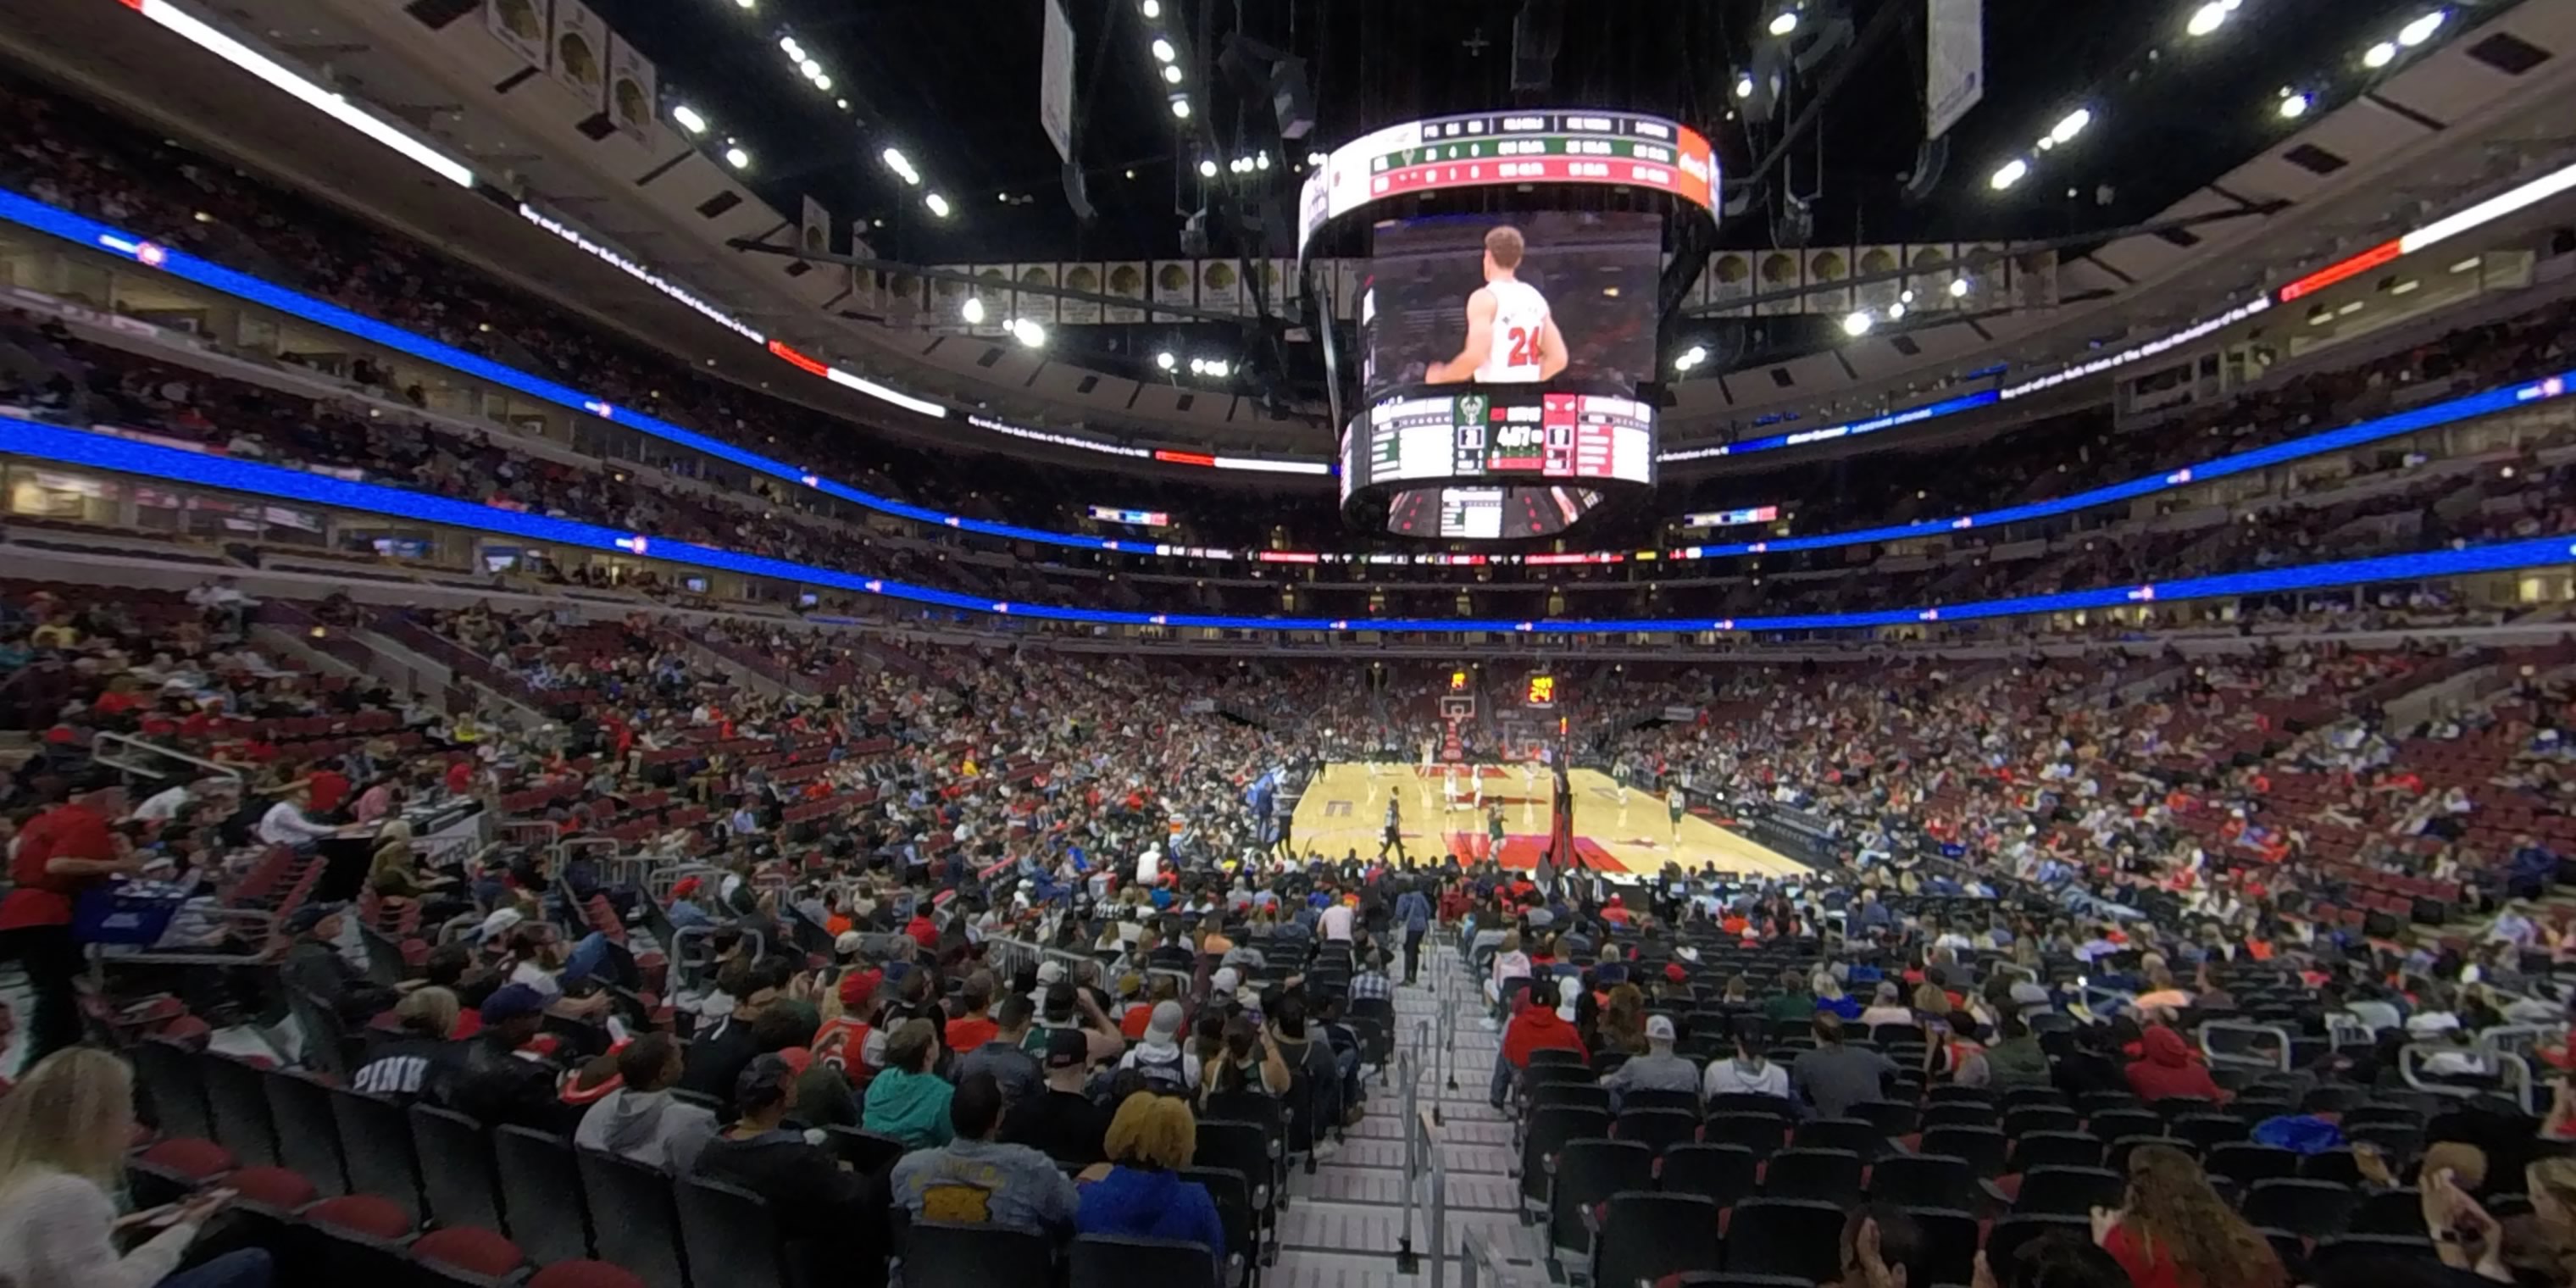 section 117 panoramic seat view  for basketball - united center